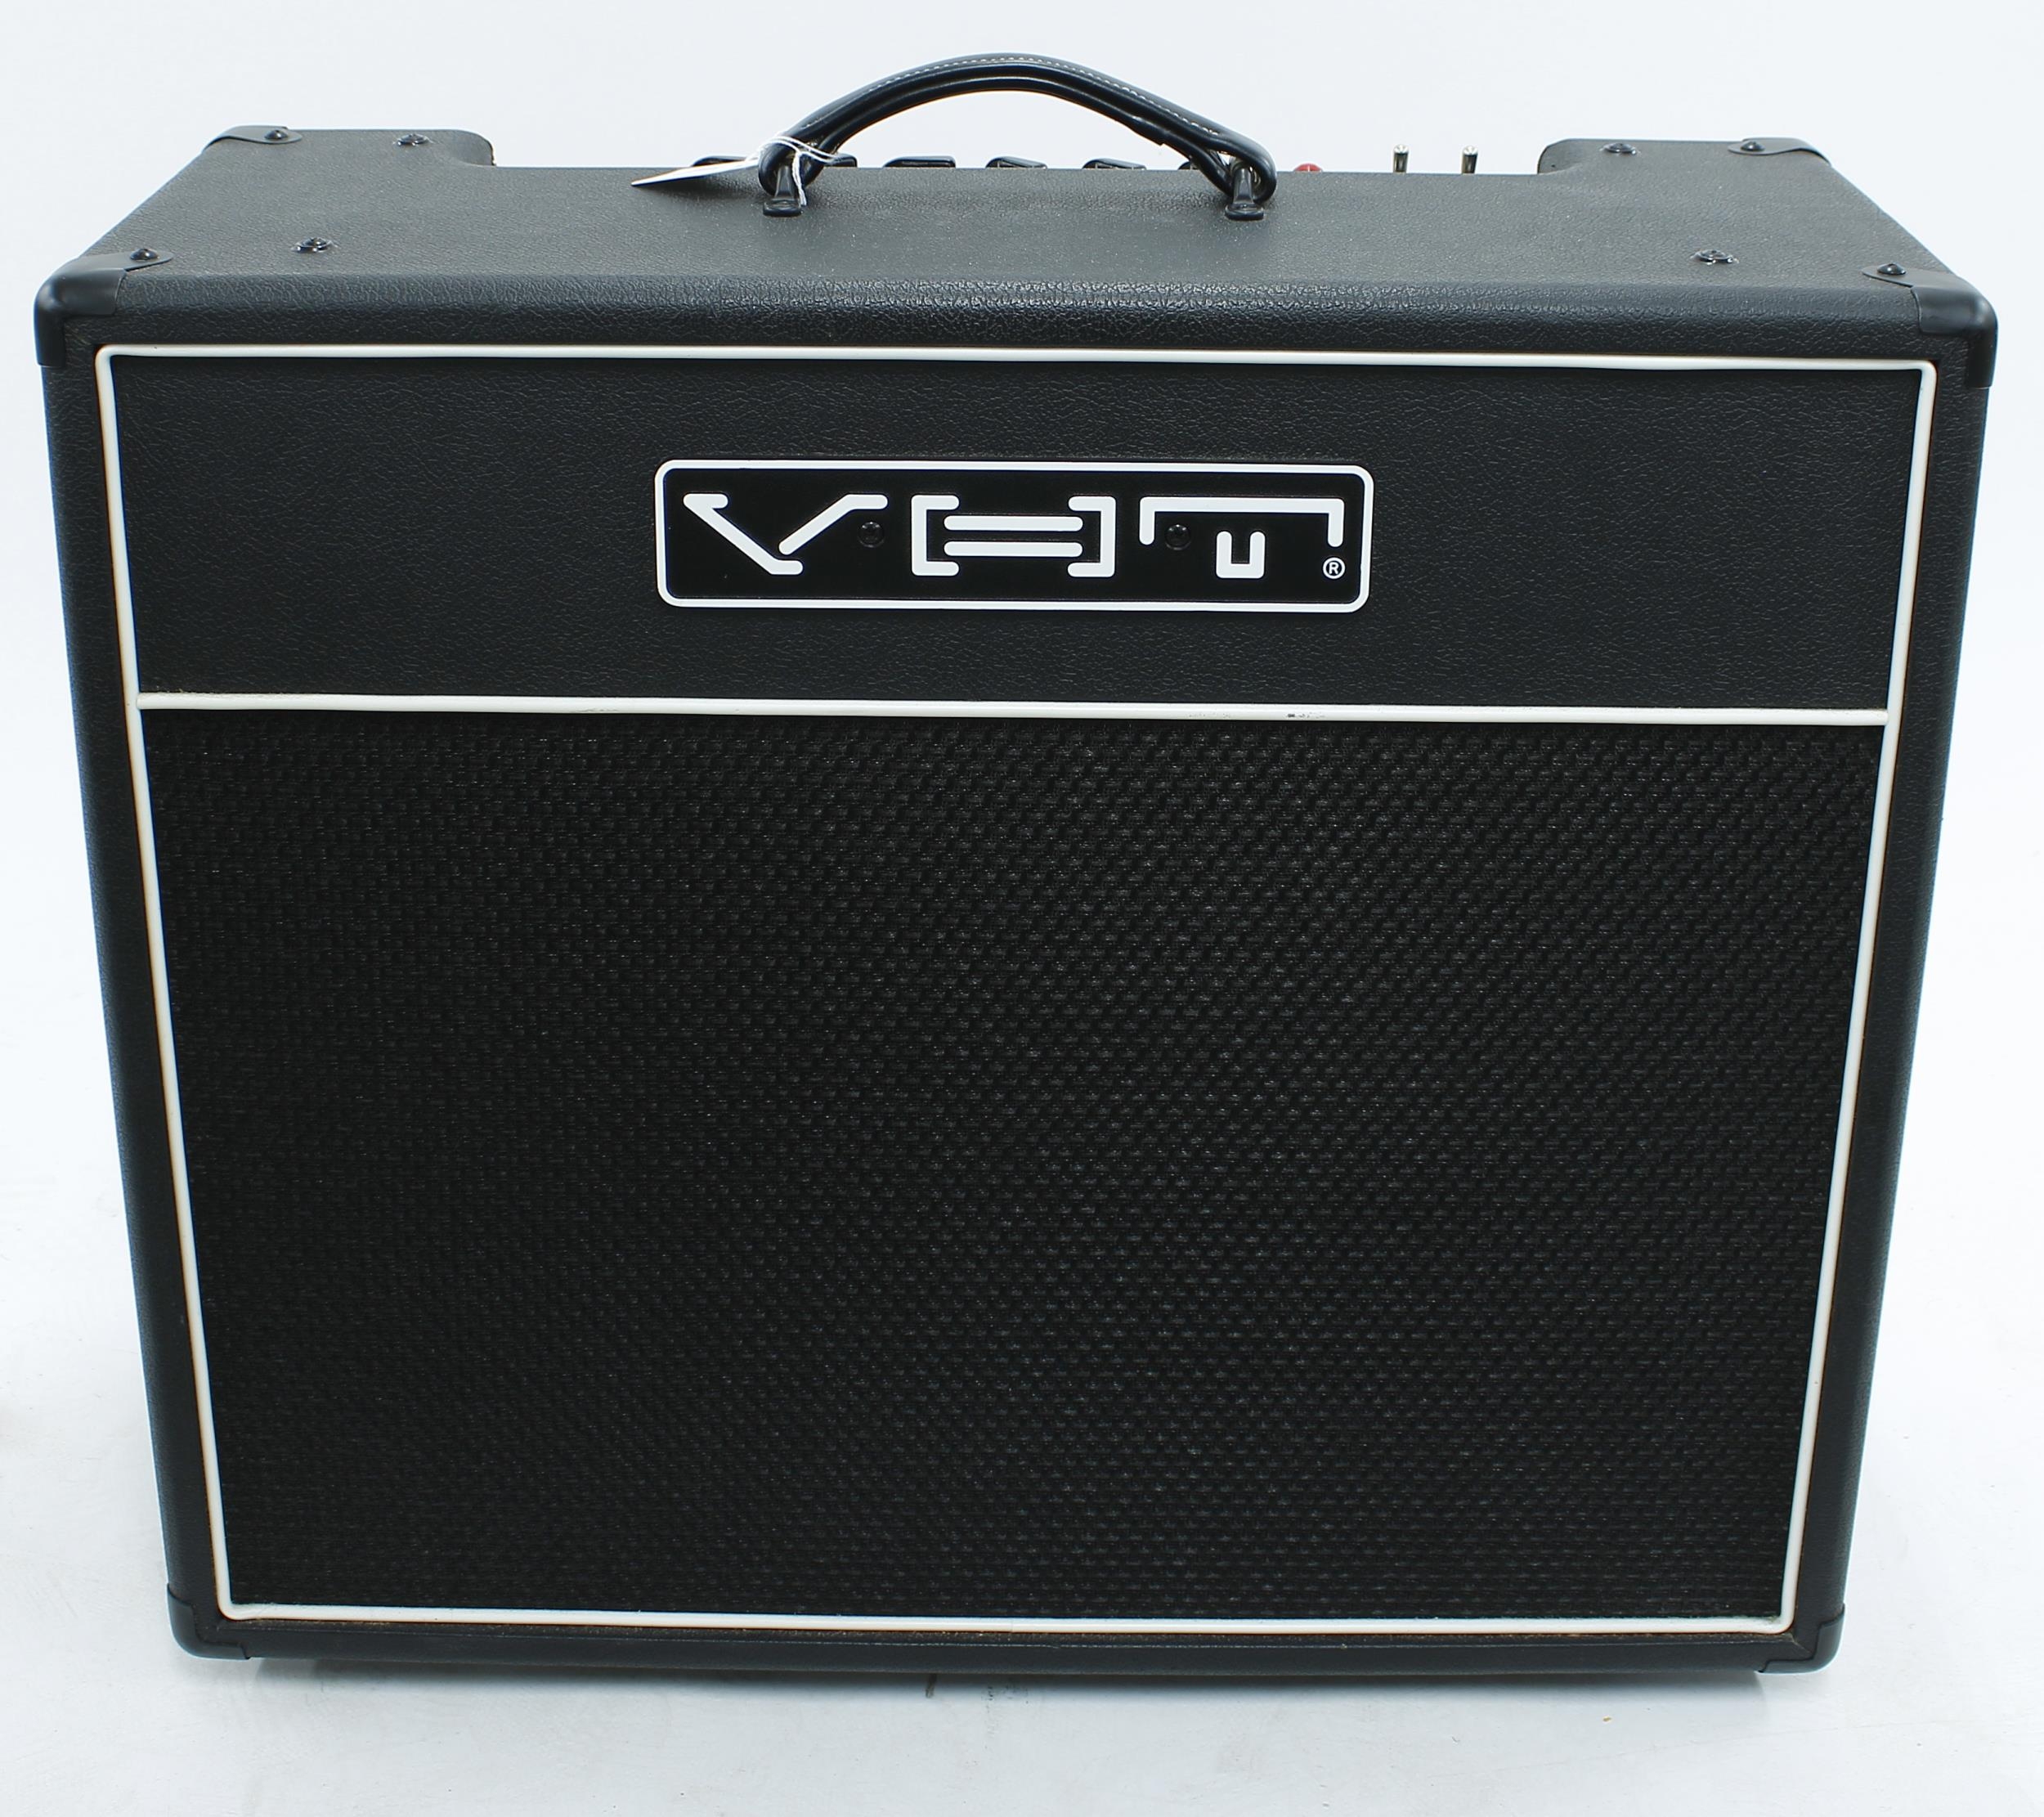 VHT Classic 18 guitar amplifier, made in China